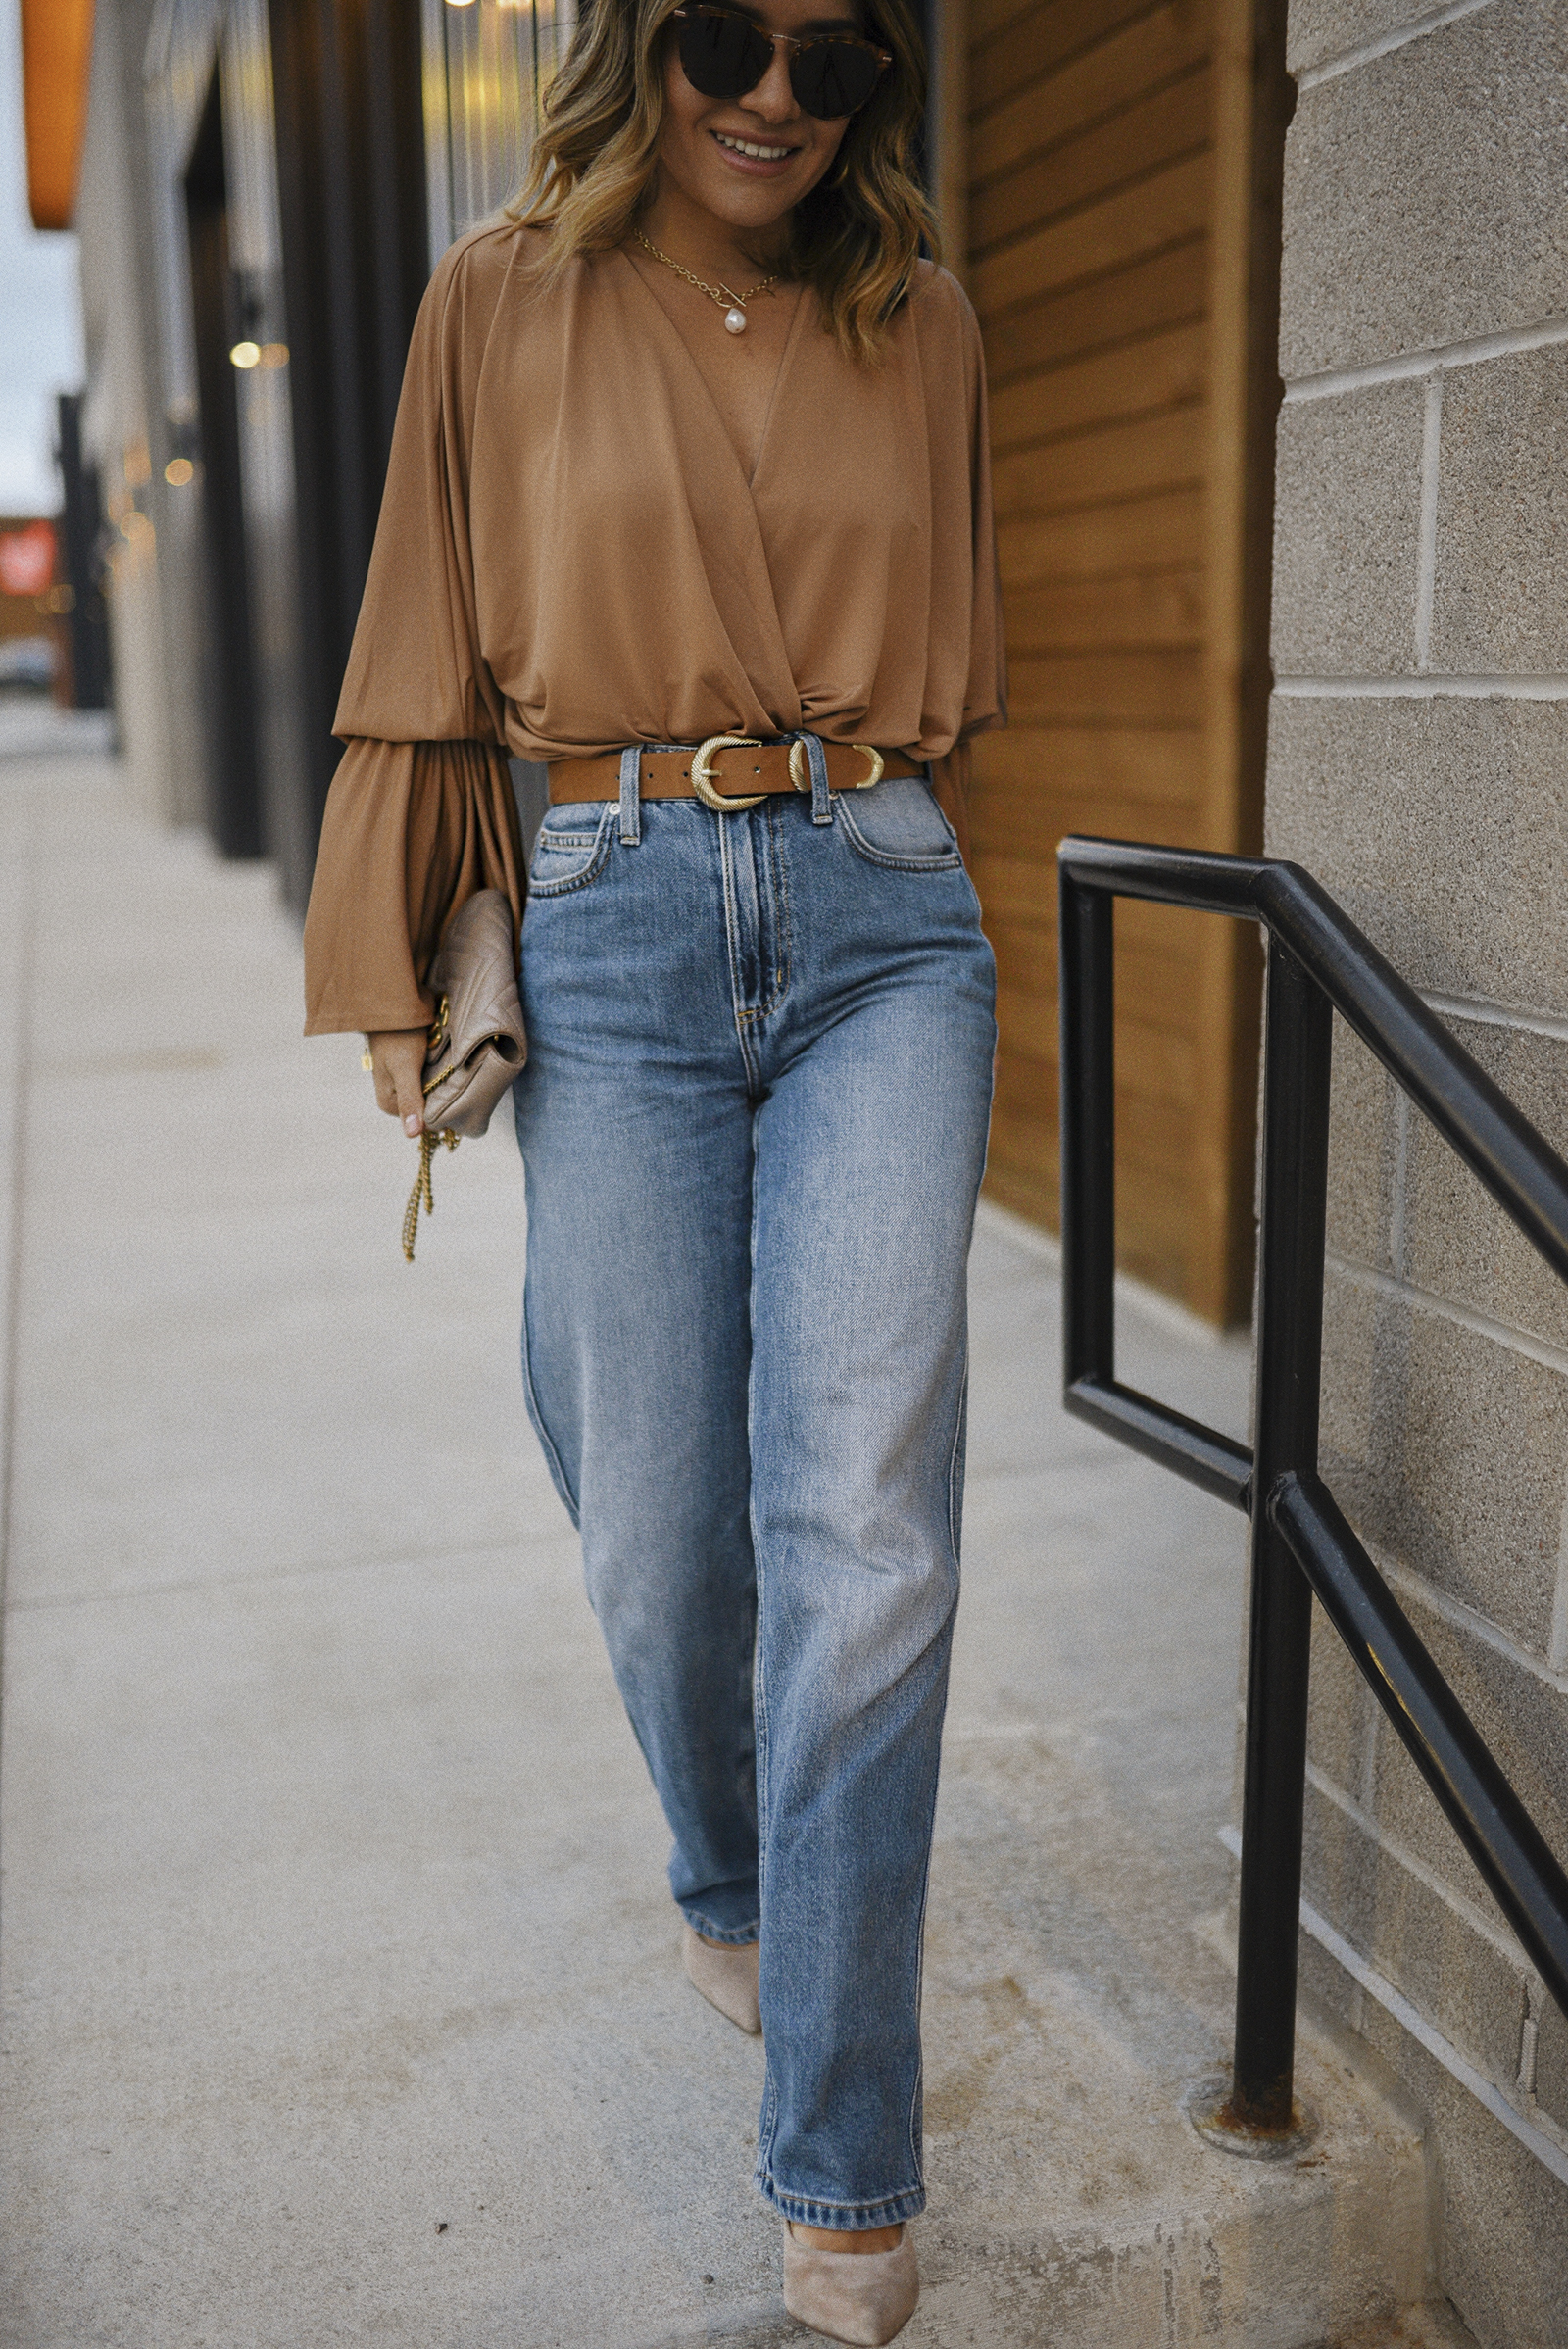 STYLISH AND AFFORDABLE TOPS FOR FALL UNDER 0 - CHIC TALK | CHIC TALK